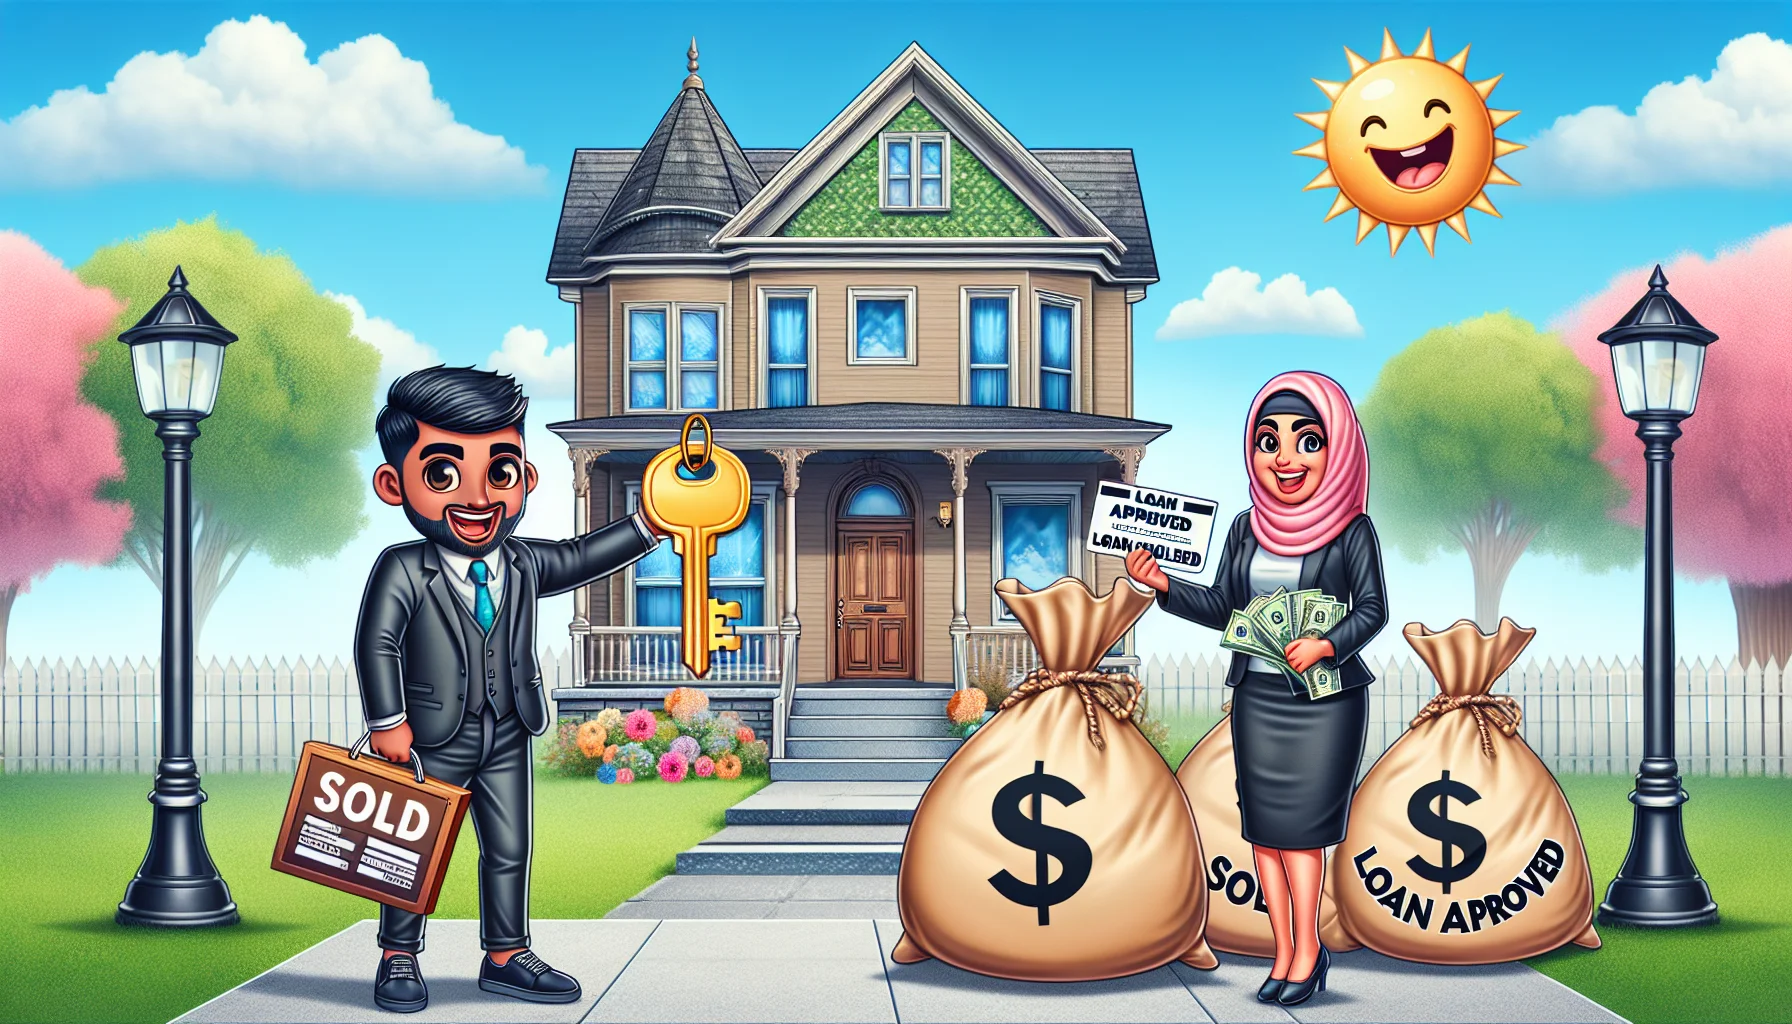 Imagine an idyllic real estate scene that perfectly depicts a laughably seamless purchase loan process. There's an excited South Asian male buyer, happy and confident, holding a large key in his hand, the symbol of his new home. A friendly Middle-Eastern female bank clerk happily hands over giant, fake bags of money with 'Loan Approved' written on them. Their transaction takes place before a gorgeous Victorian-era house with a 'SOLD' sign in the front yard. Add whimsical touches to accentuate the humor, like a rainbow in the sky and a laughing sun overhead, reflecting the perfect nature of scenario.